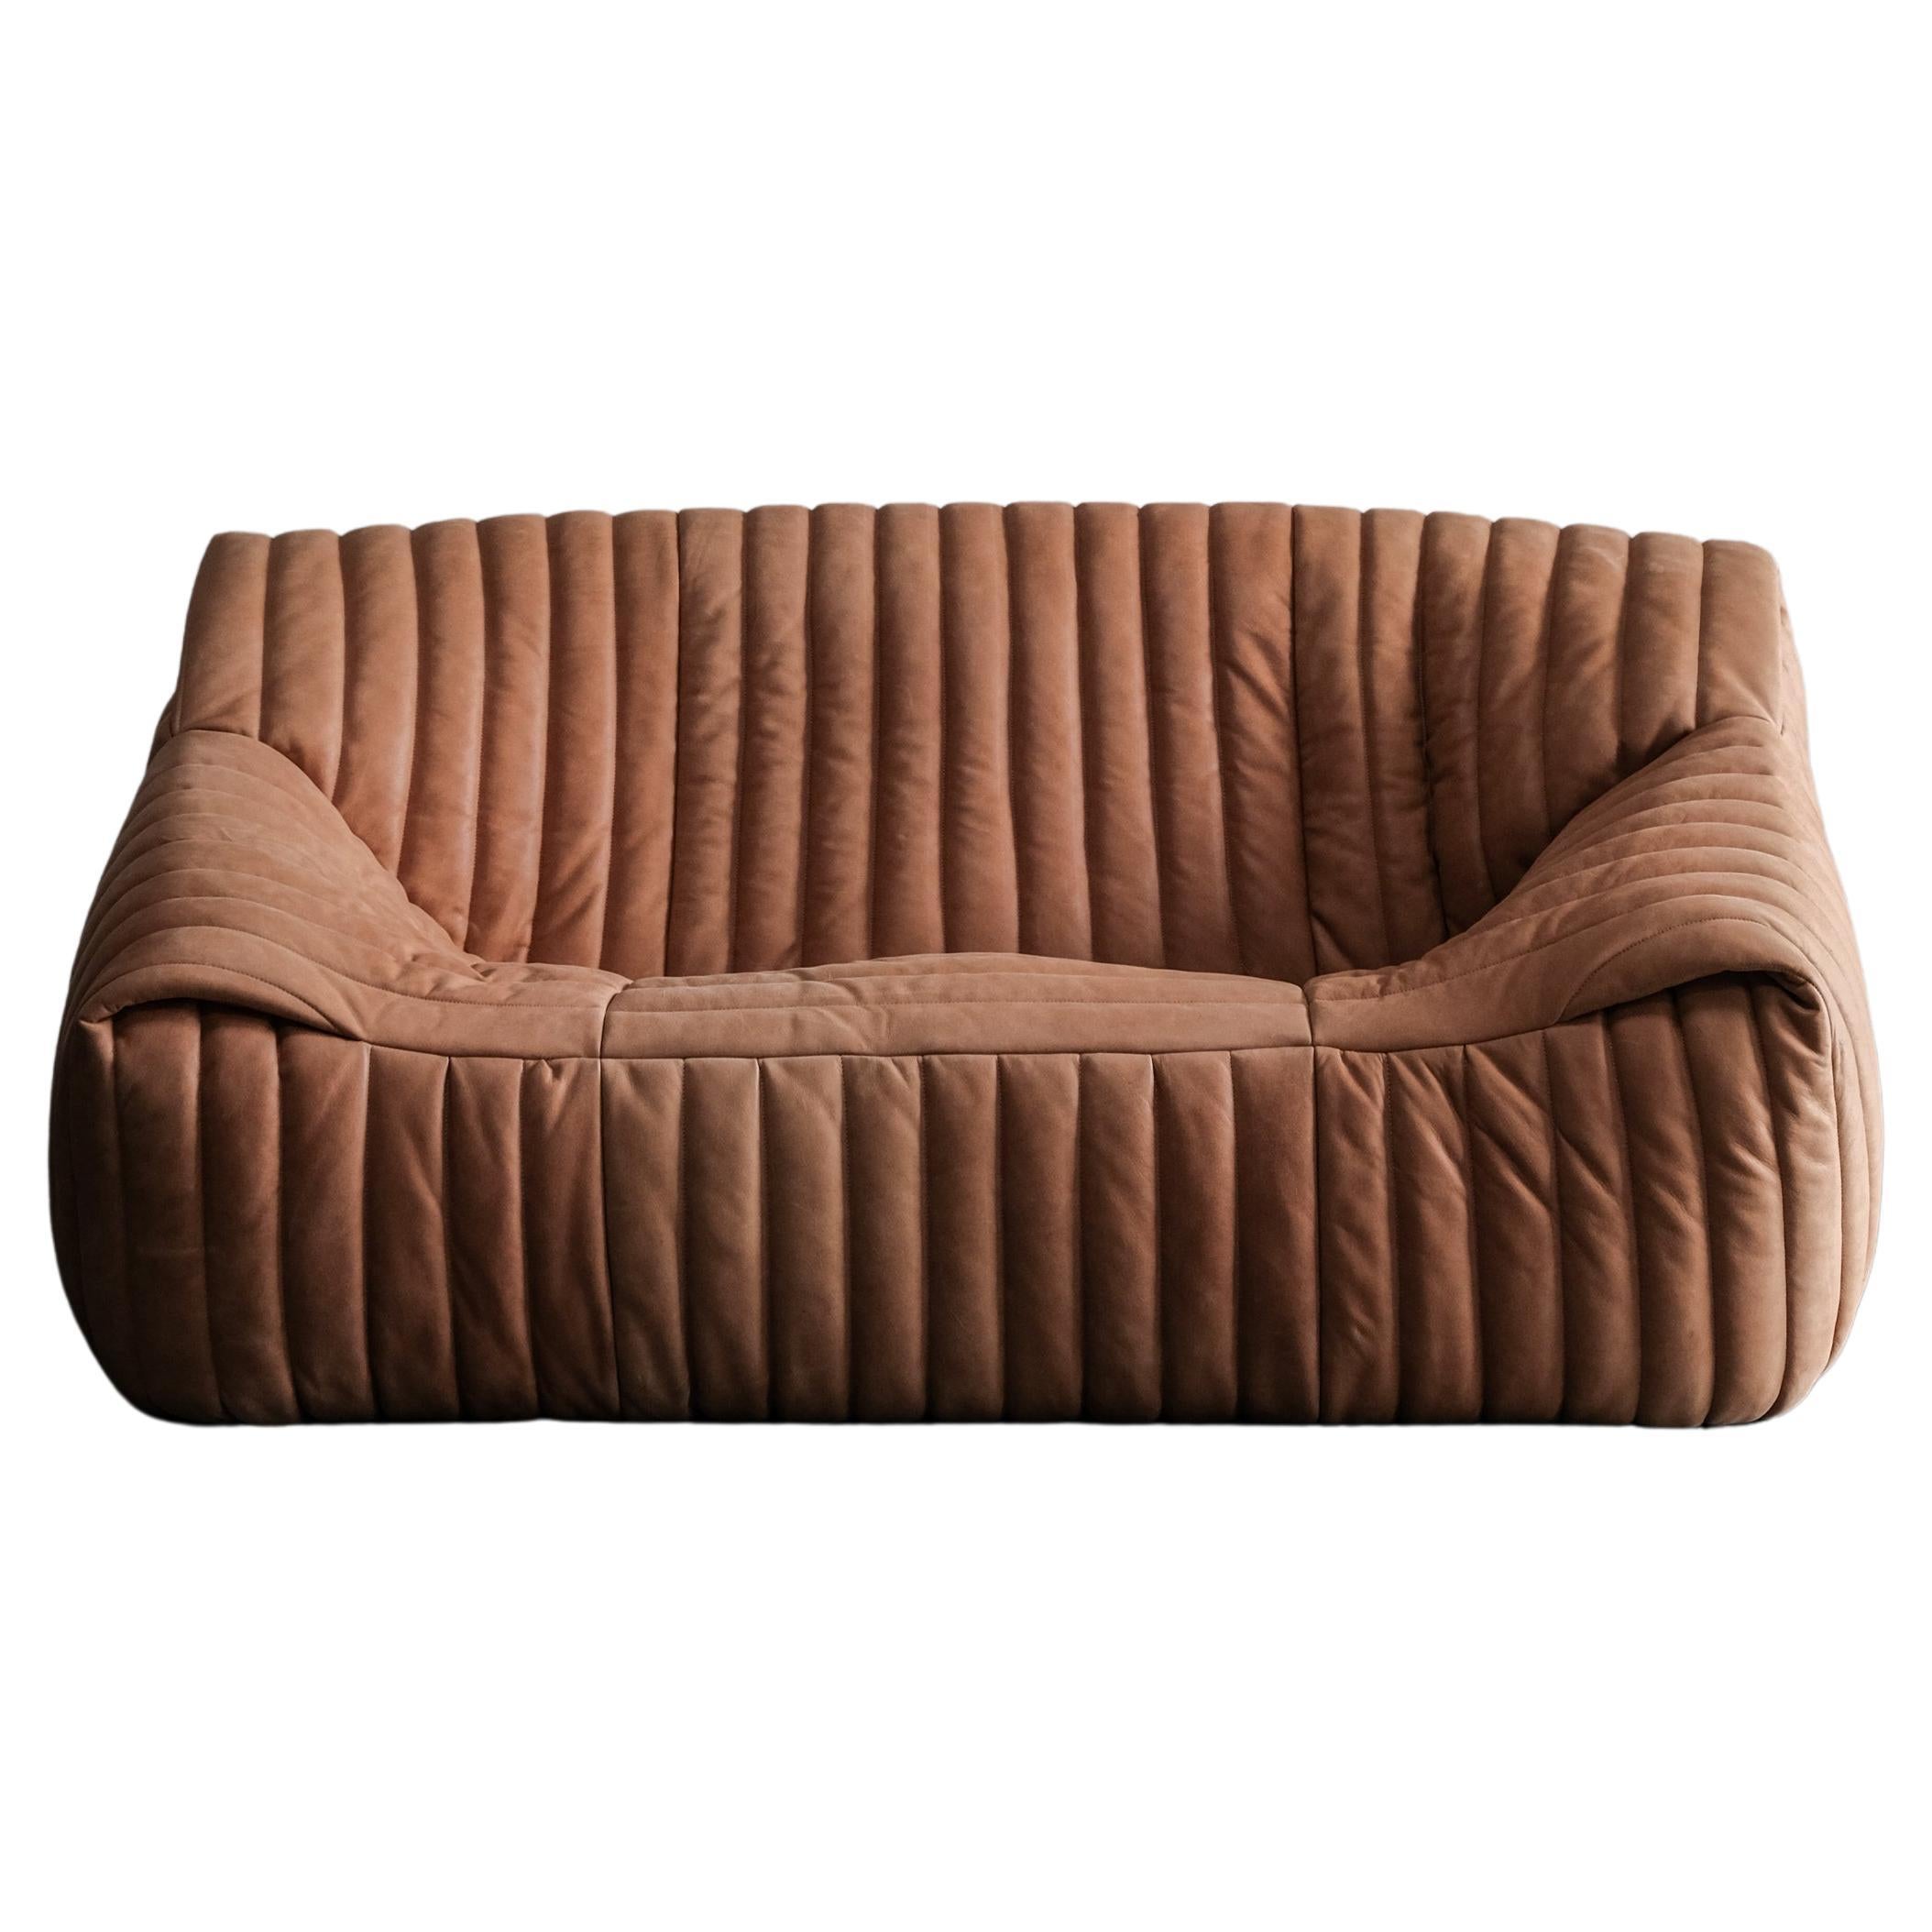 Sandra 2 seater sofa by Annie Hieronimus for Cinna in cognac leather